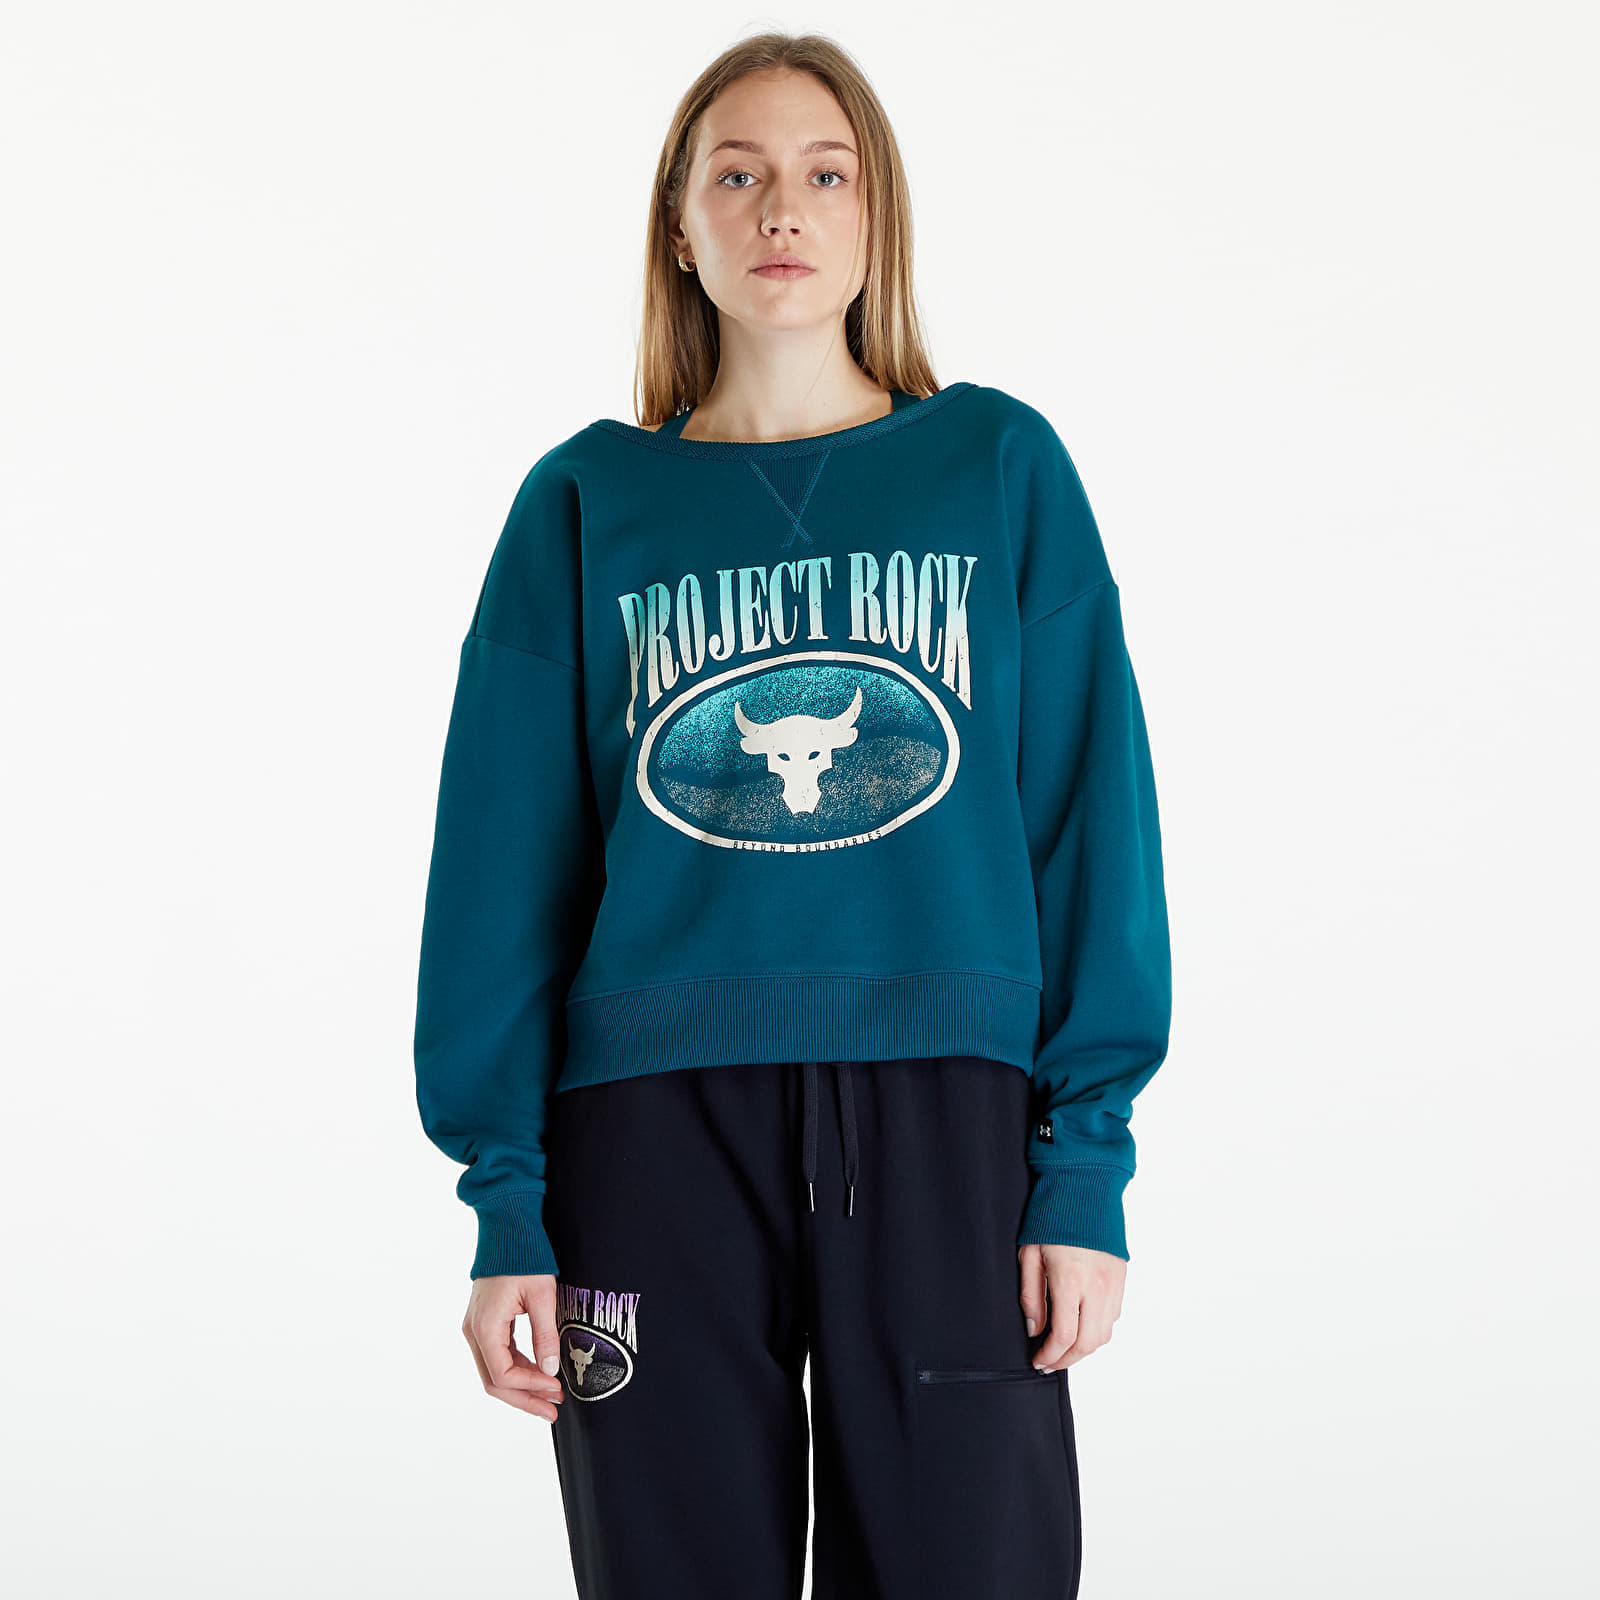 Under Armour - project rock terry sweatshirt turquoise